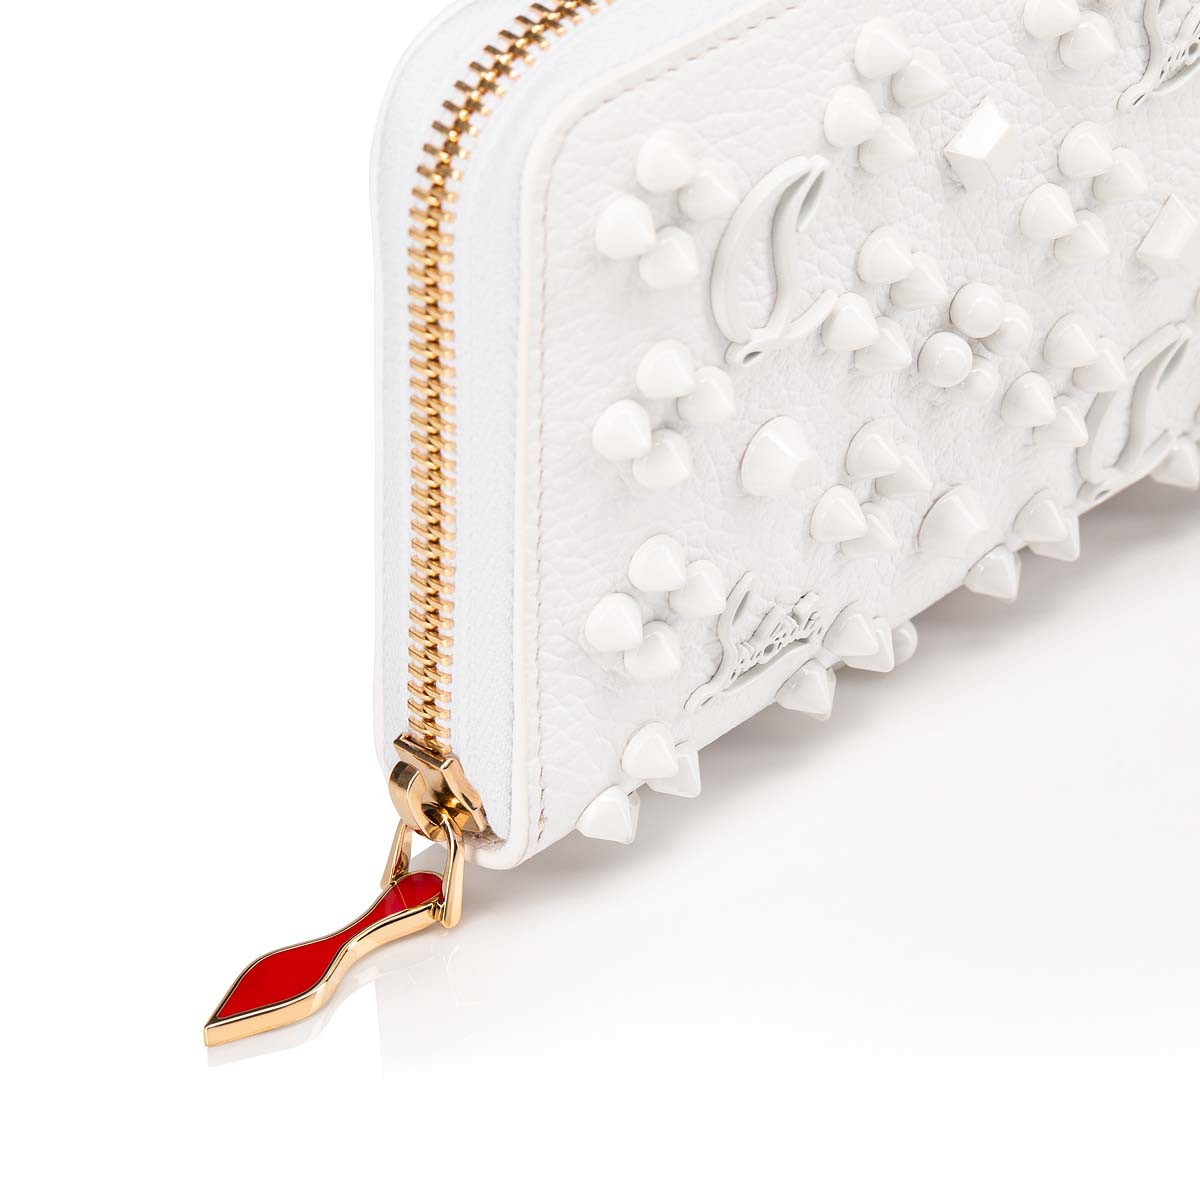 Small Leather Goods - Panettone Wallet - Christian Louboutin